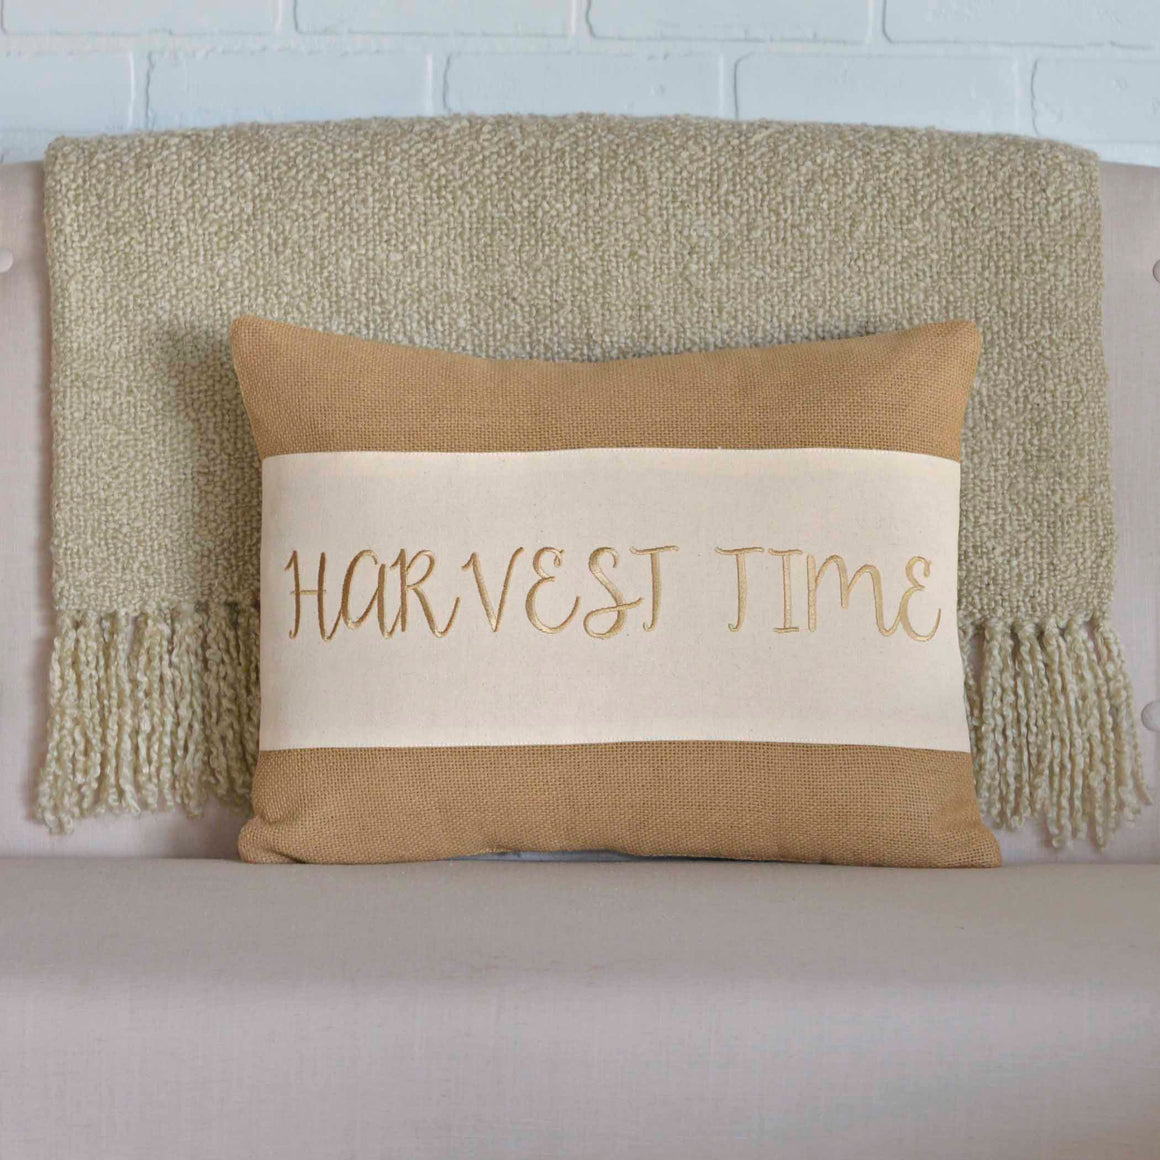 Harvest Time Embroidered Pillow